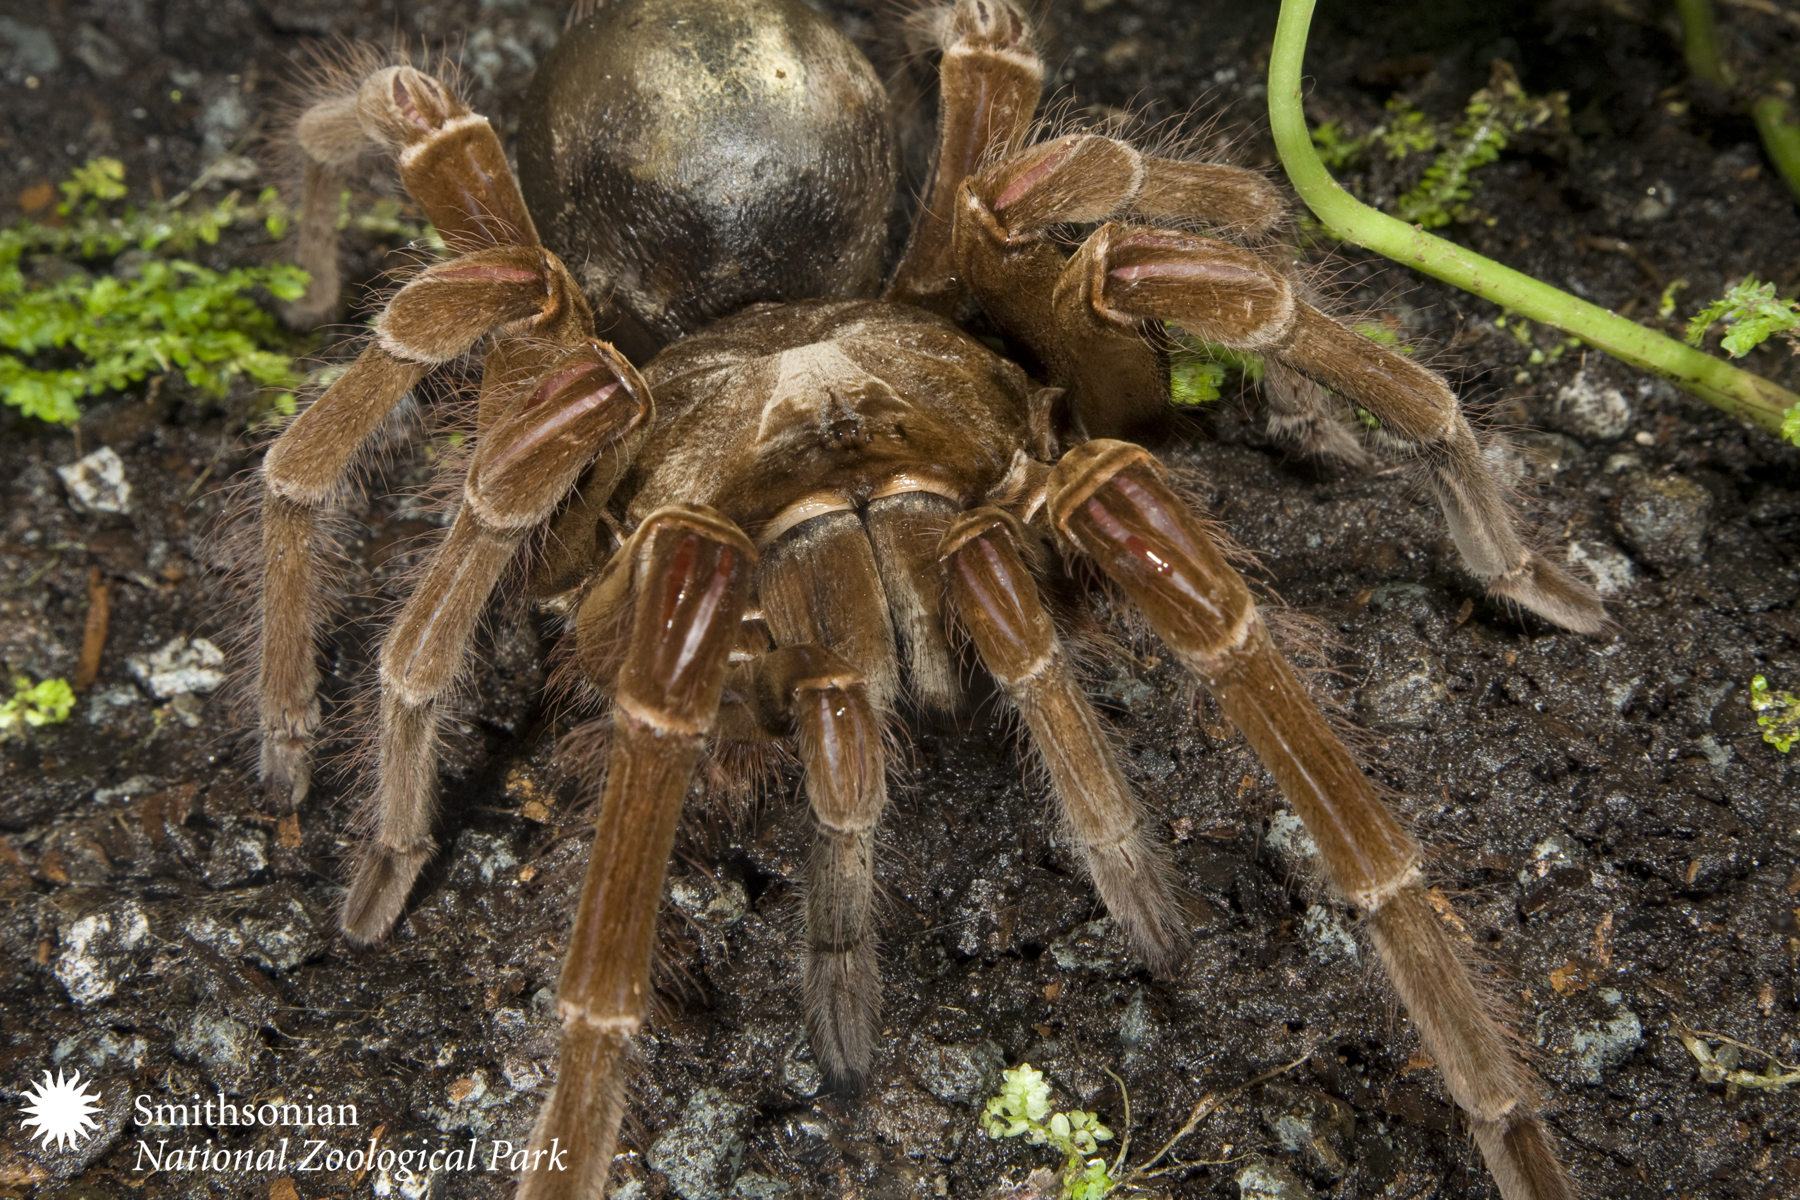 PHOTO: The birdeating spider does not in fact eat birds. It subsists on worms and mice.